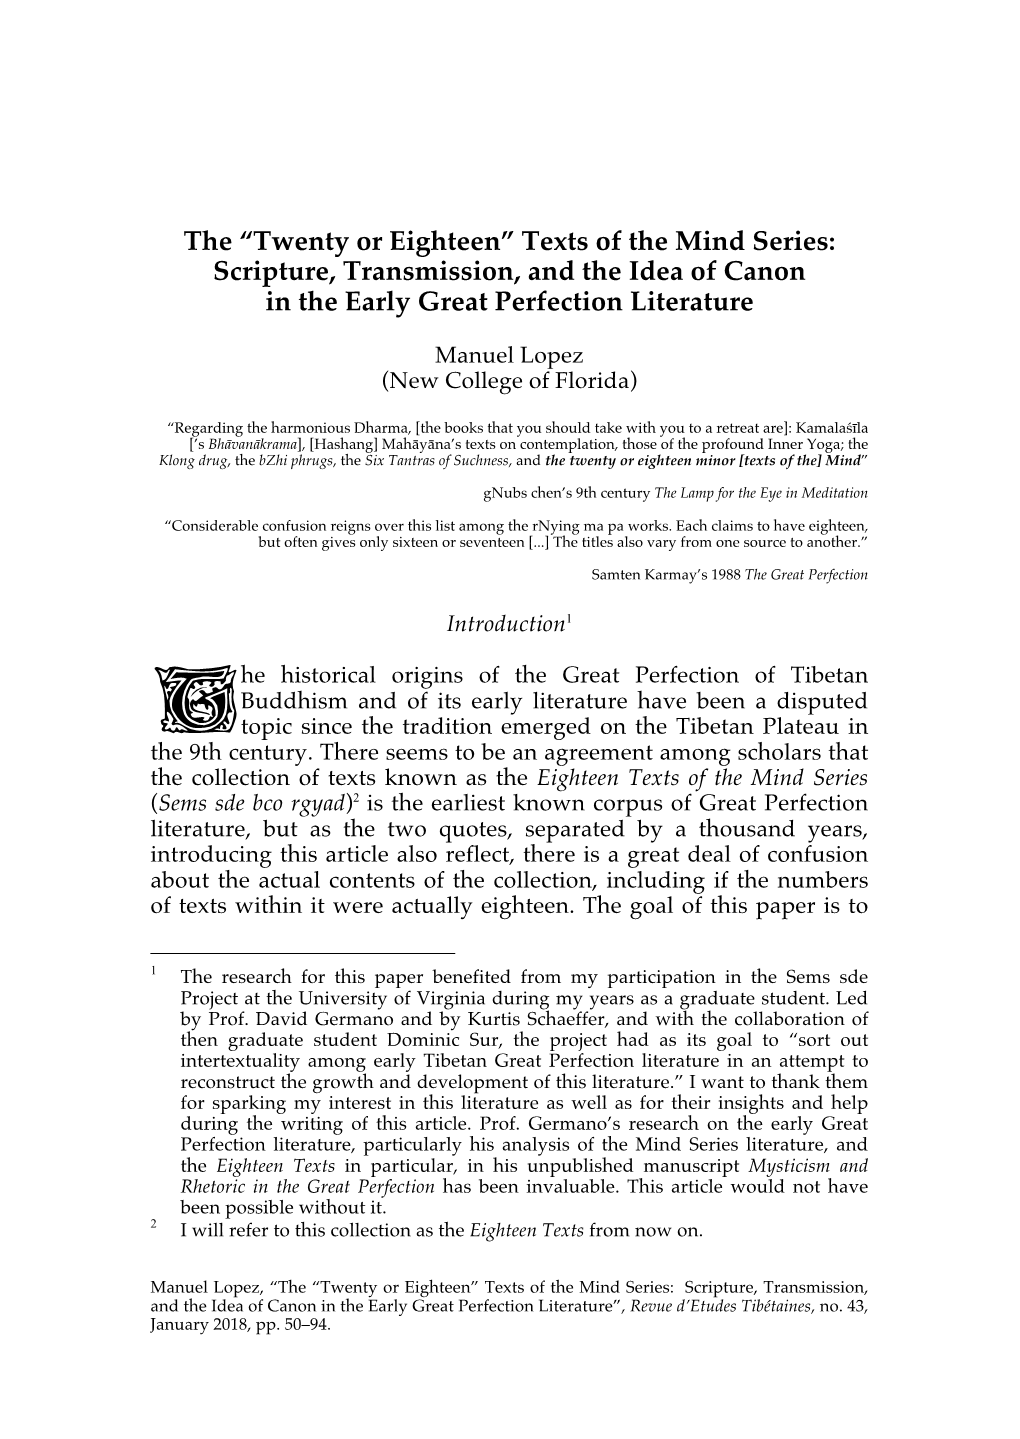 The “Twenty Or Eighteen” Texts of the Mind Series: Scripture, Transmission, and the Idea of Canon in the Early Great Perfection Literature